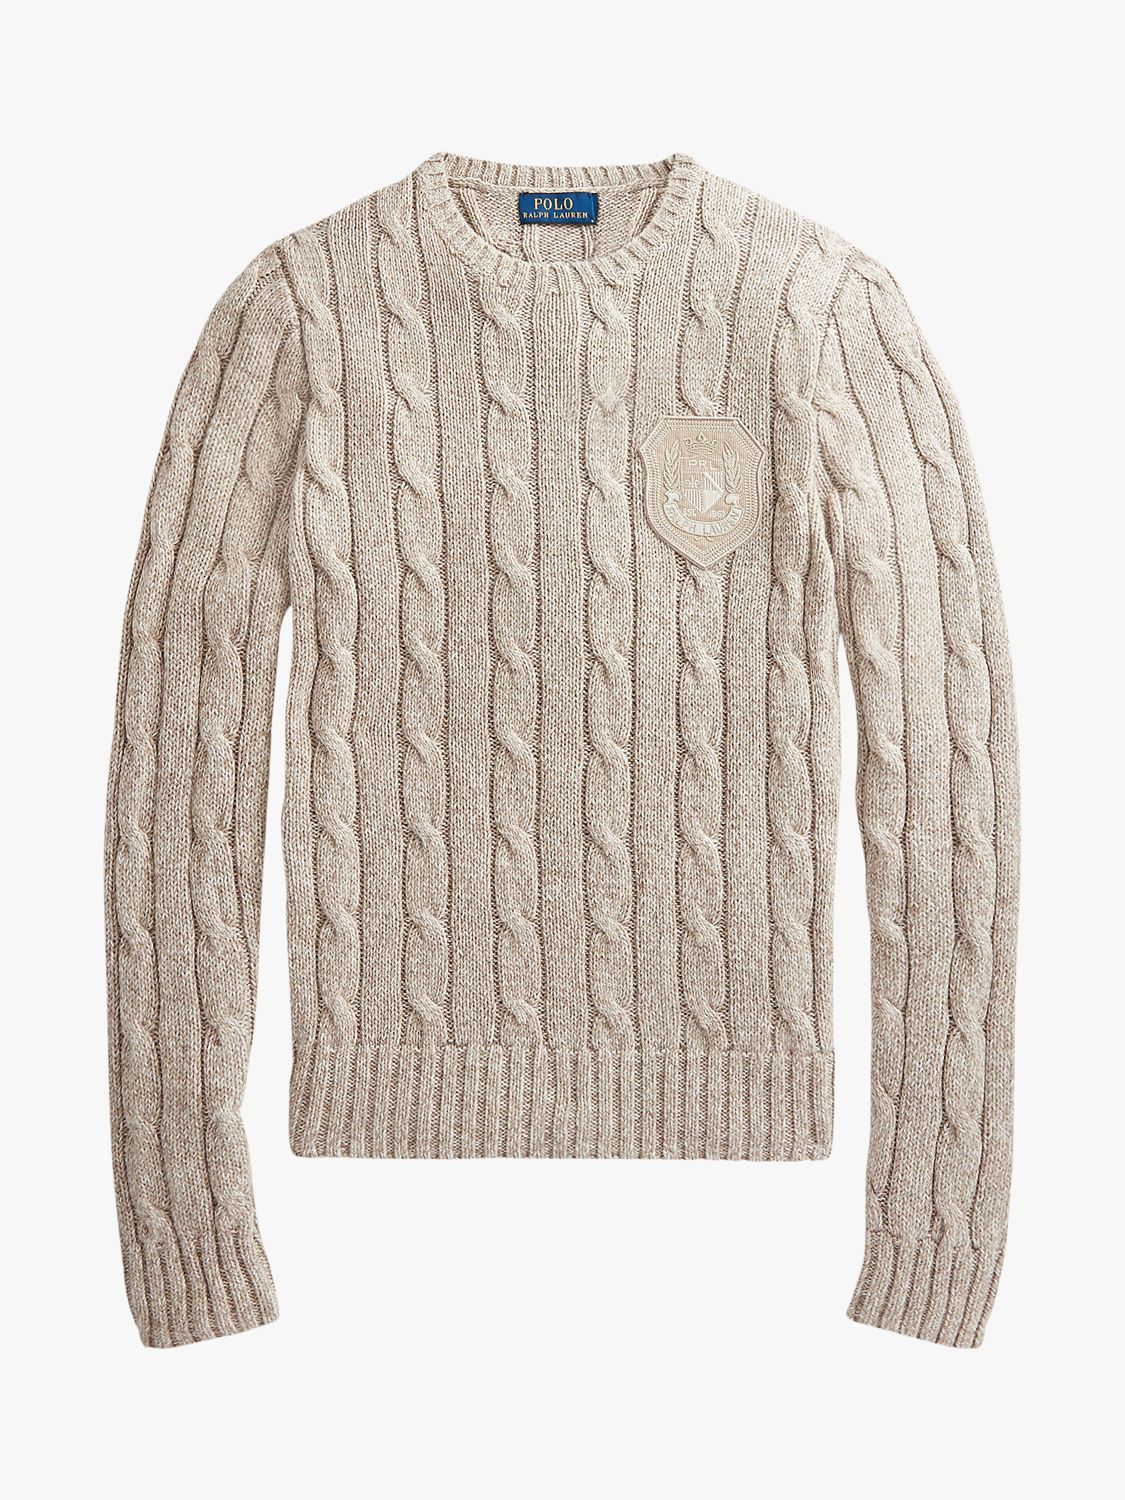 Polo Ralph Lauren Cotton Cable Knit Jumper, Taupe